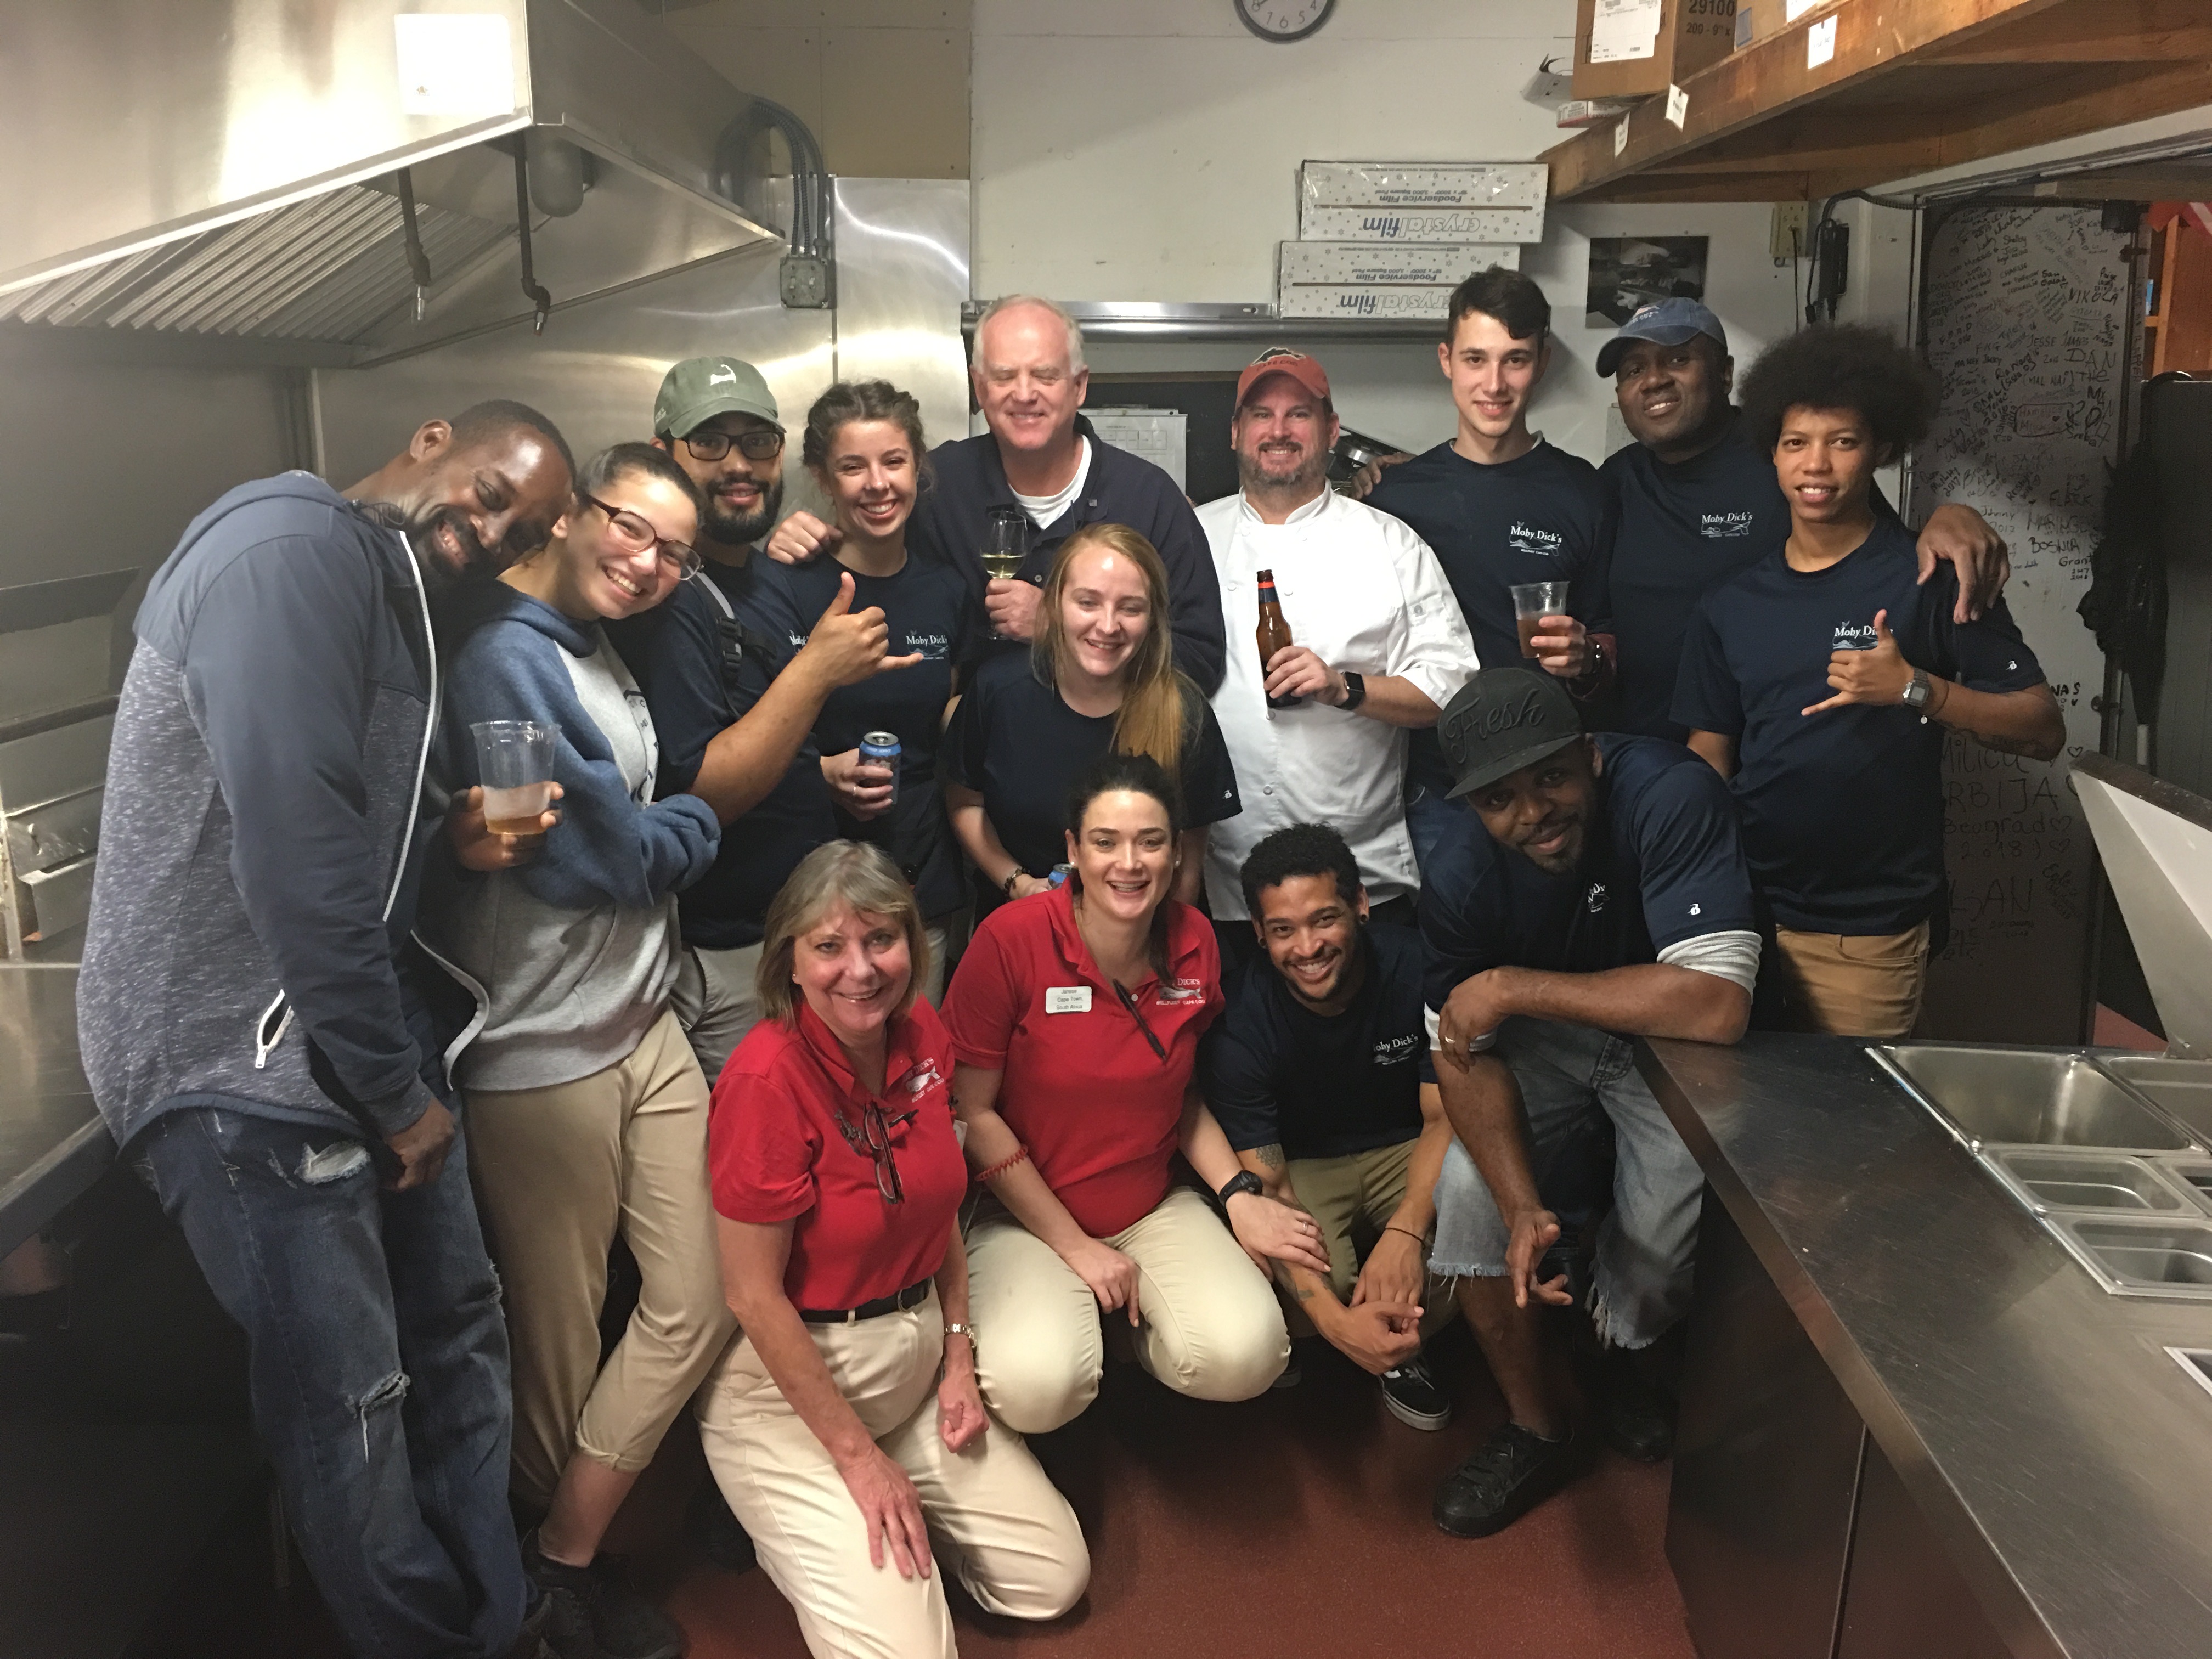 group photo of Moby Dick's restaurant staff in the kitchen holding drinks